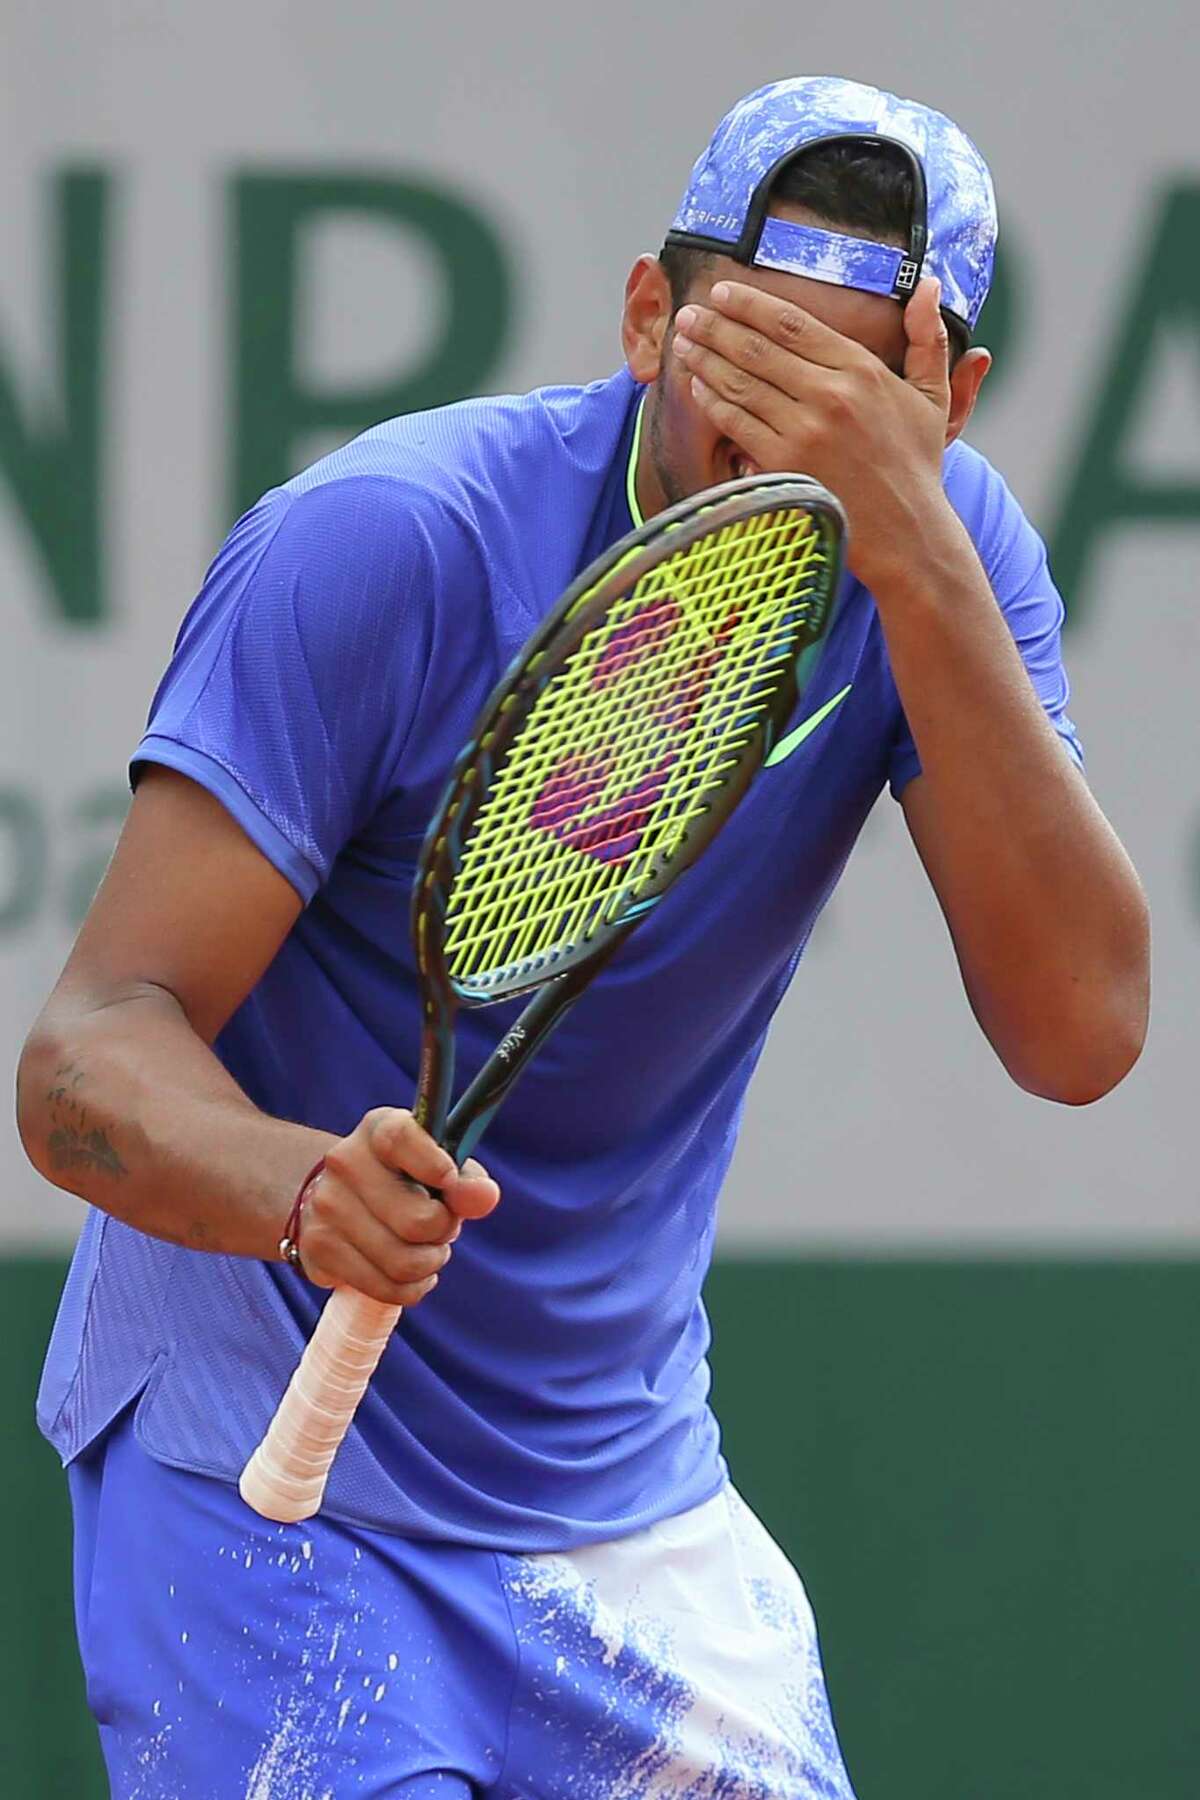 Australian Nick Kyrgios can't bear to watch what he's about to do to his racket after missing a shot and eventually losing a set Thursday at the French Open.